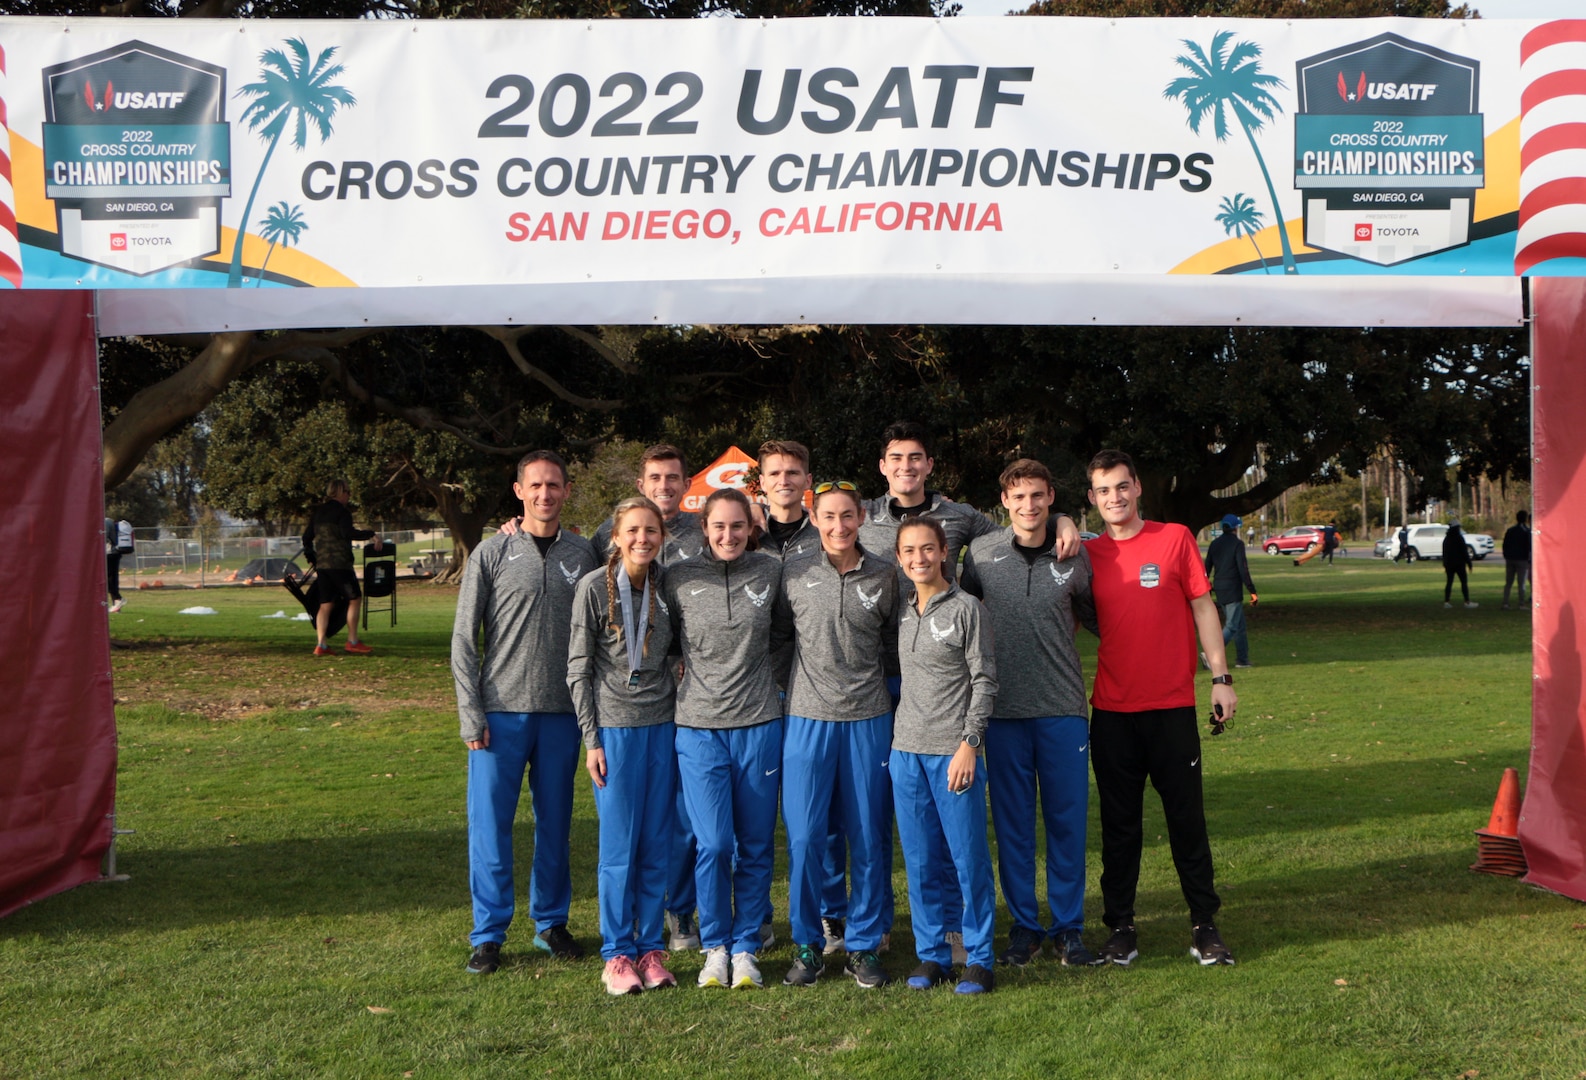 Team Air Force at the 2022 Armed Forces Cross Country Championship held in conjunction with the USA Track and Field National Cross Country Championship at Mission Bay Park in San Diego, Calif. on January 8th.  Runners from the Marine Corps, Navy (with Coast Guard) and Air Force compete for gold.  (Department of Defense Photo - Released)